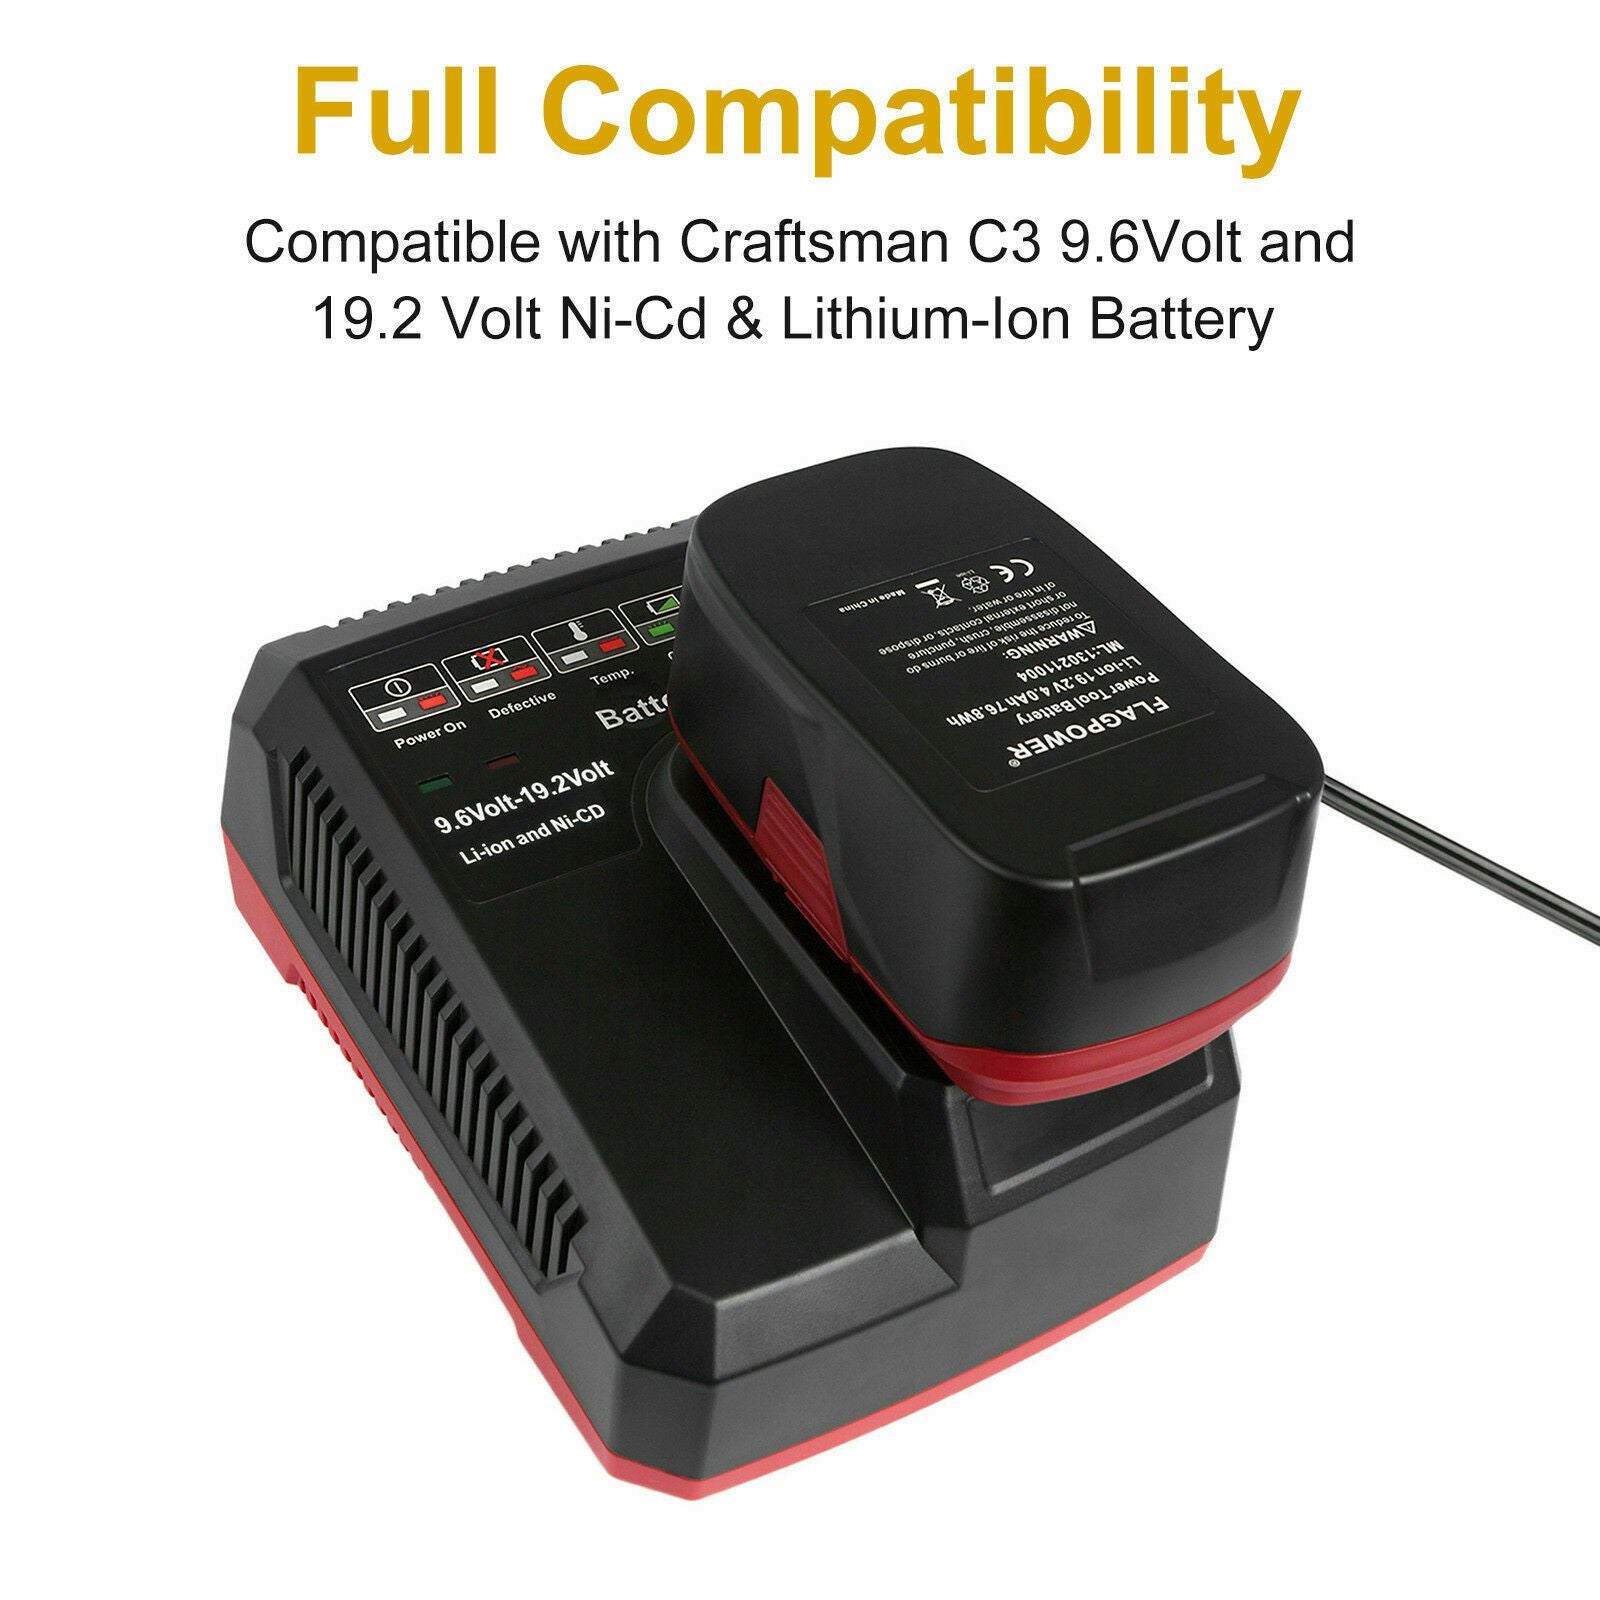 Craftsman Battery Charger | C3 19.2 Volt Lithium-ion & Ni-Cd